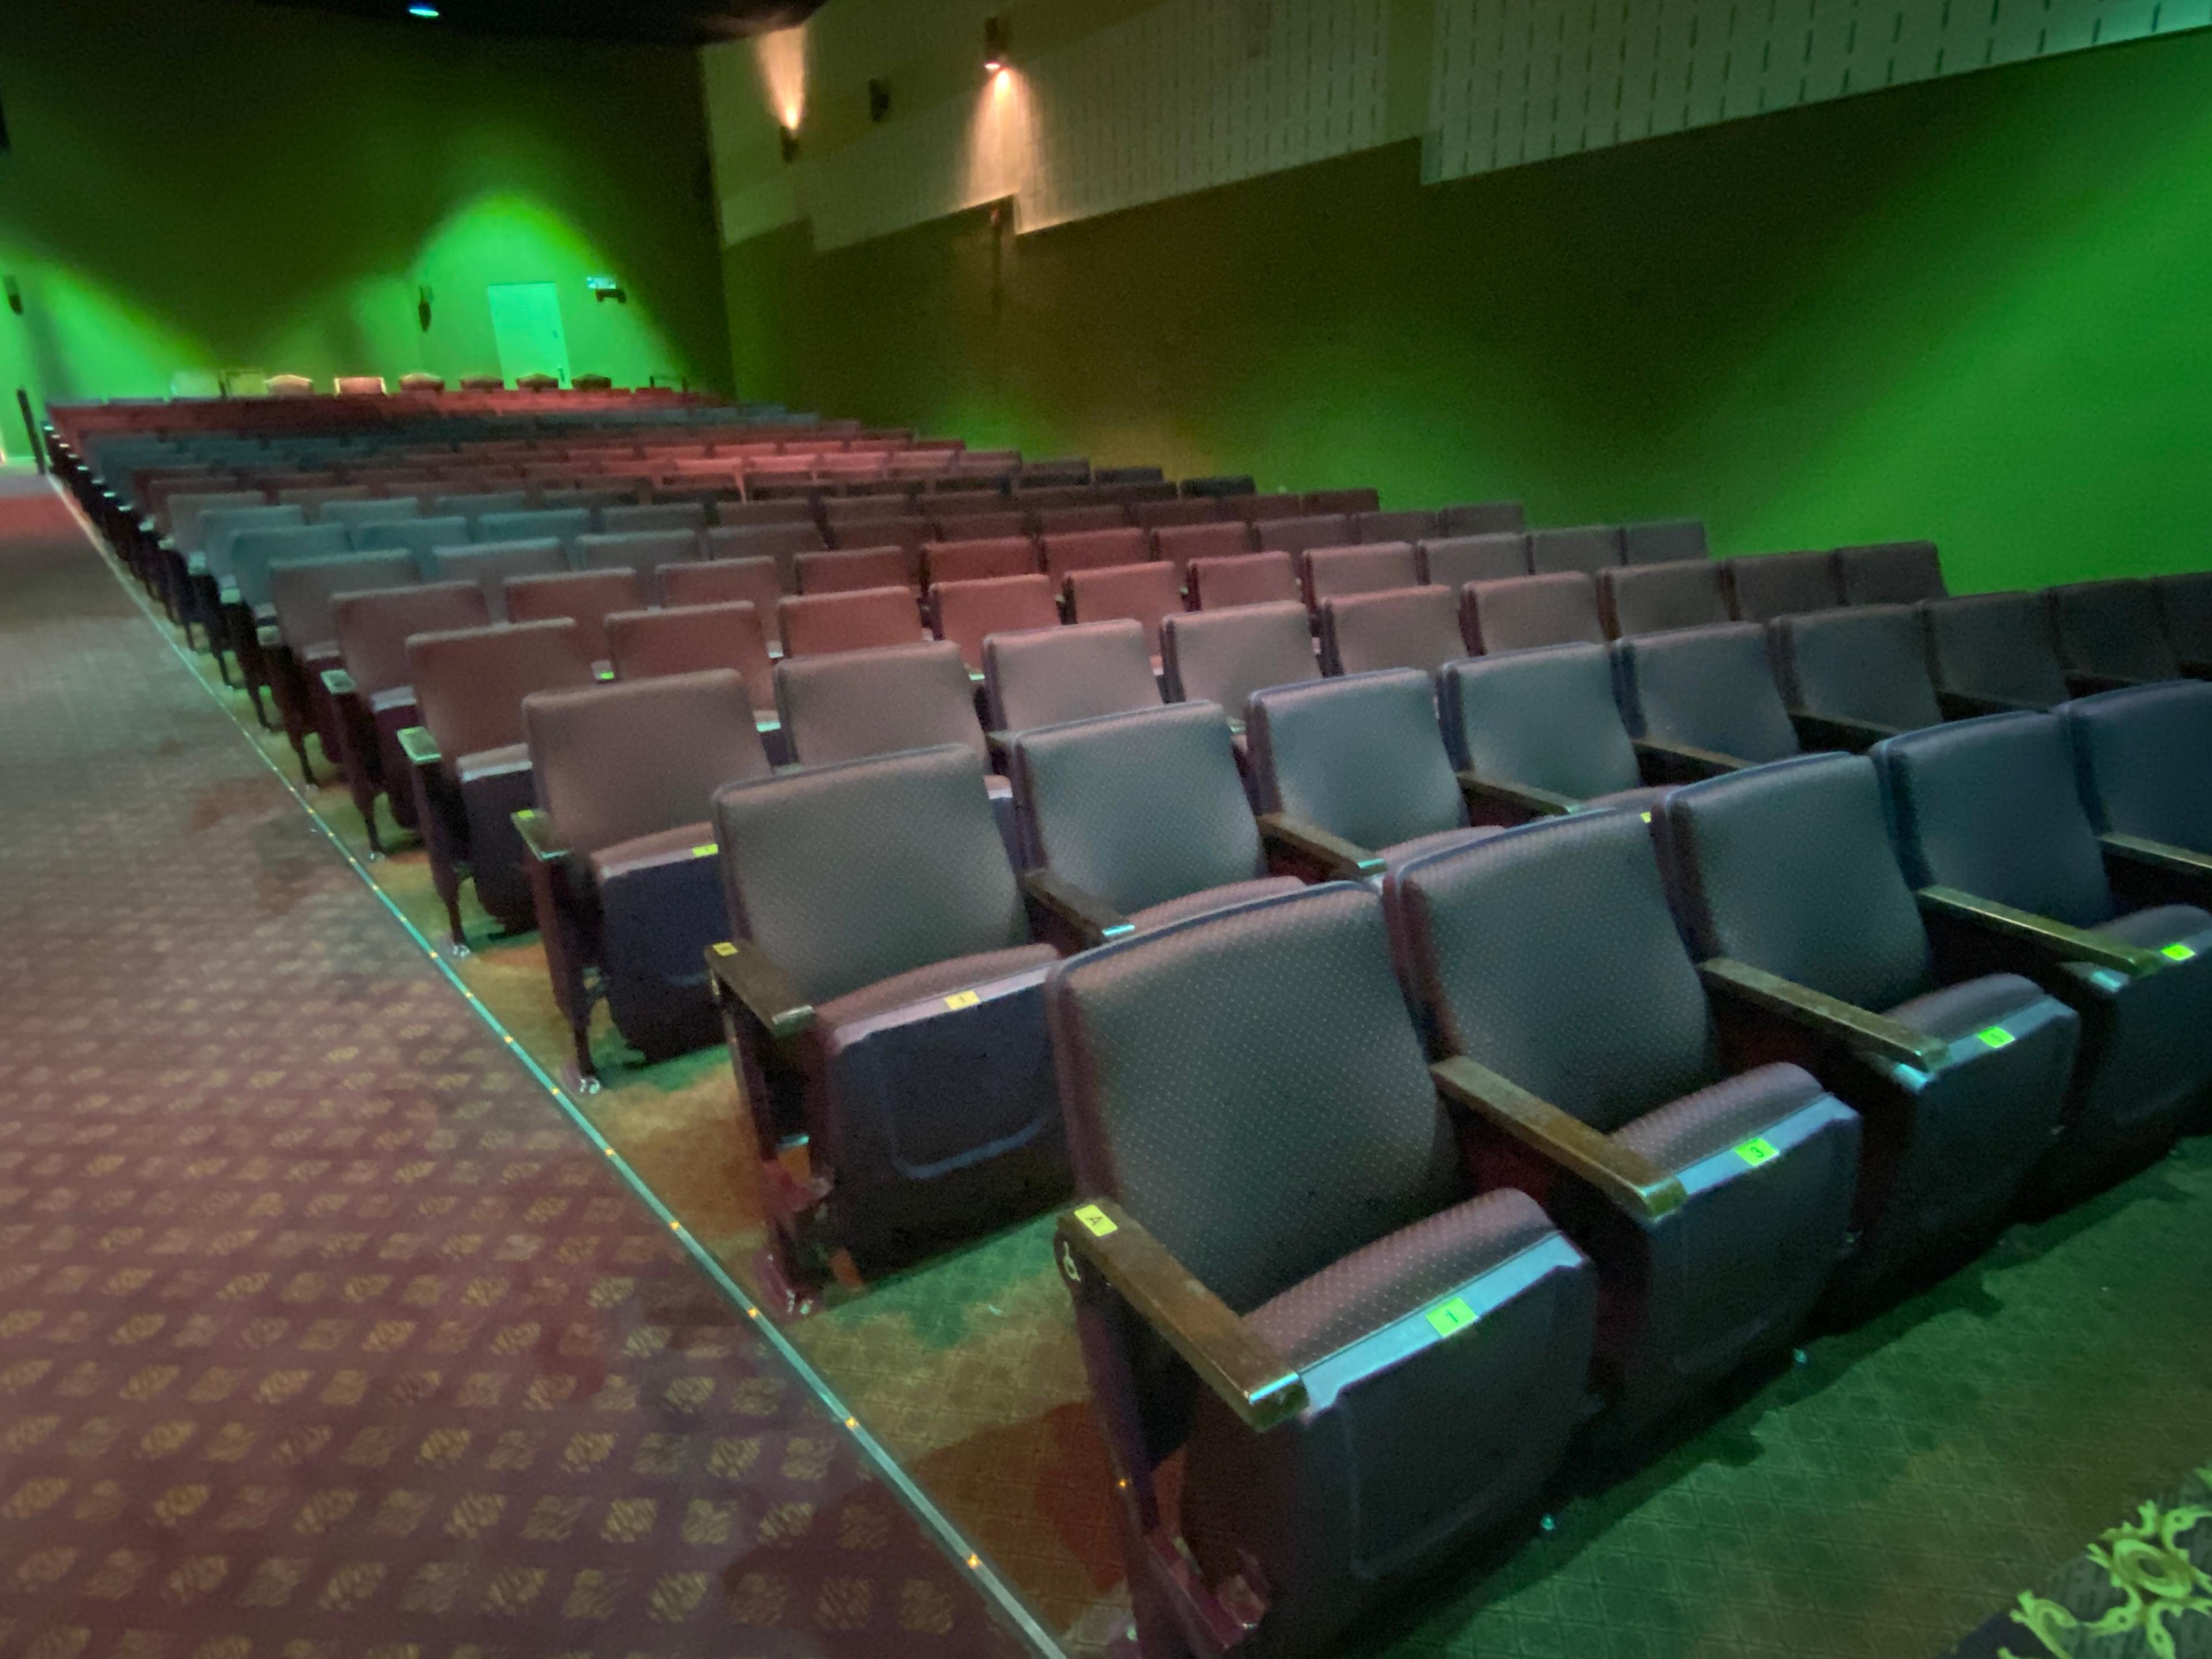 Retactable Cushioned Theater Seating. The Seats and Backs are made with a Durable Commercial Fabric